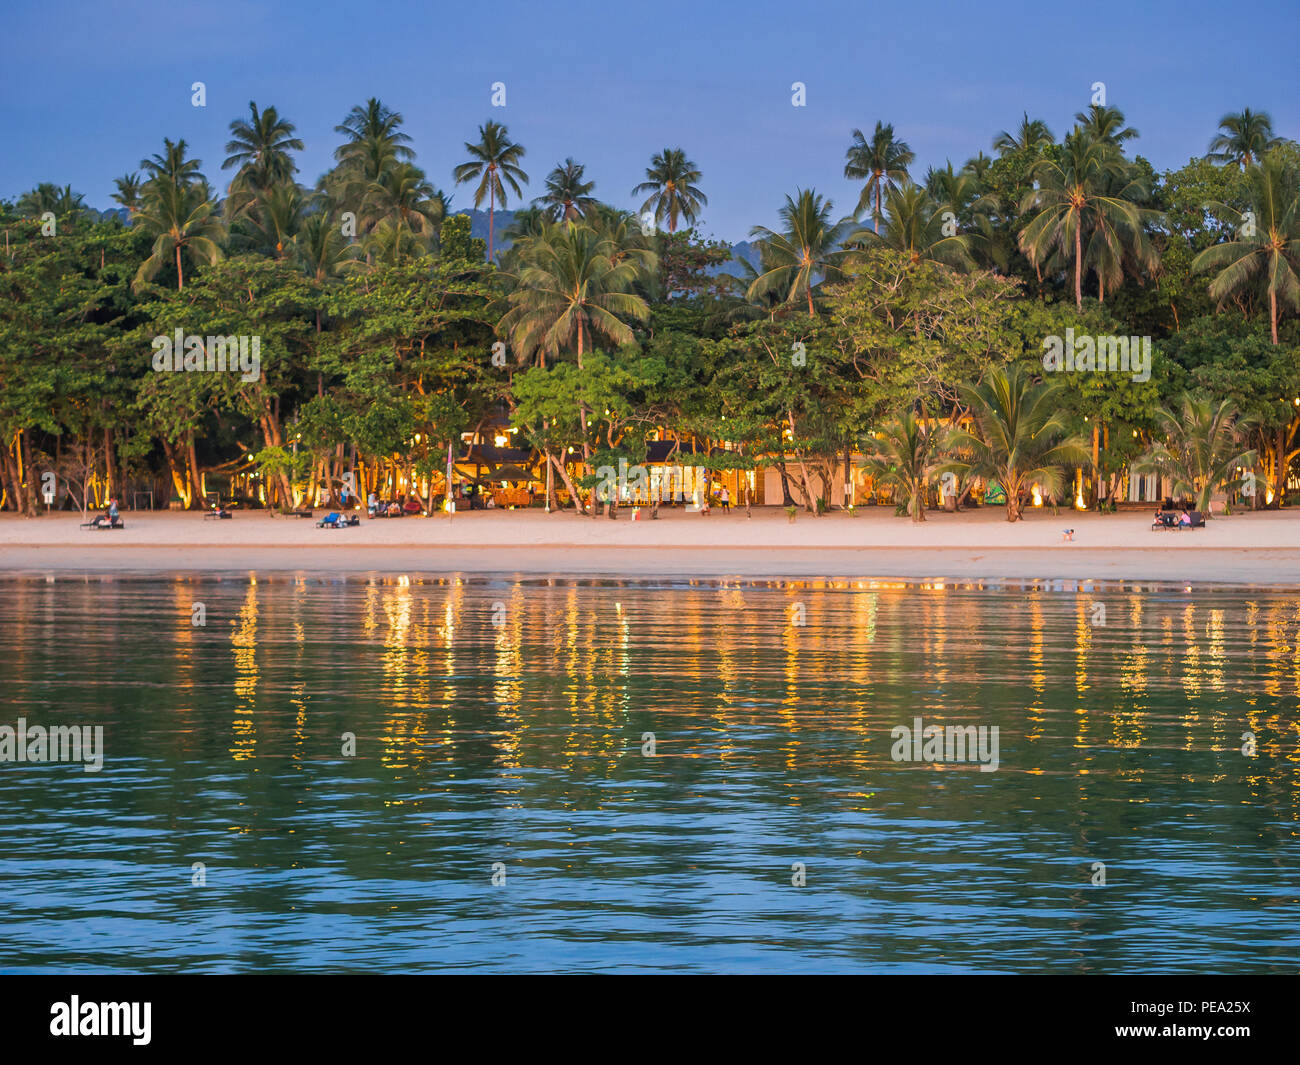 Lio beach luxury resort on the beach at dusk, people relaxing on the beach looking at sunset Stock Photo